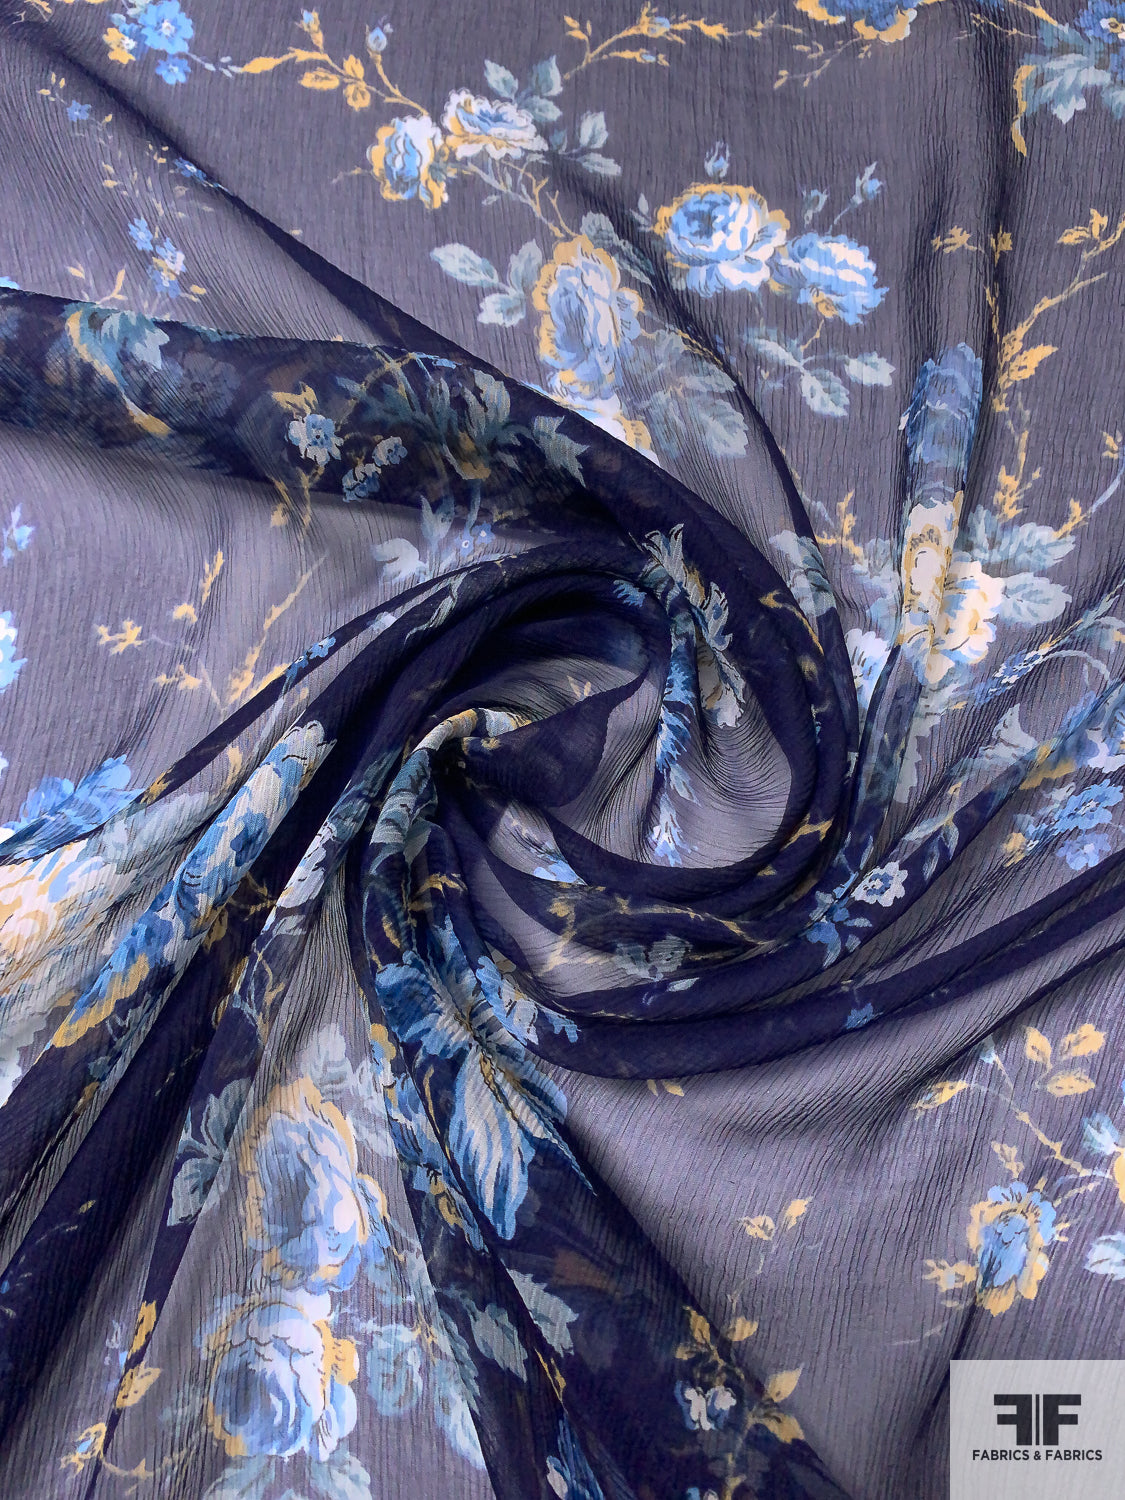 Romantic Floral Printed Crinkled Silk Chiffon - Navy / Blue / Amber Yellow / White